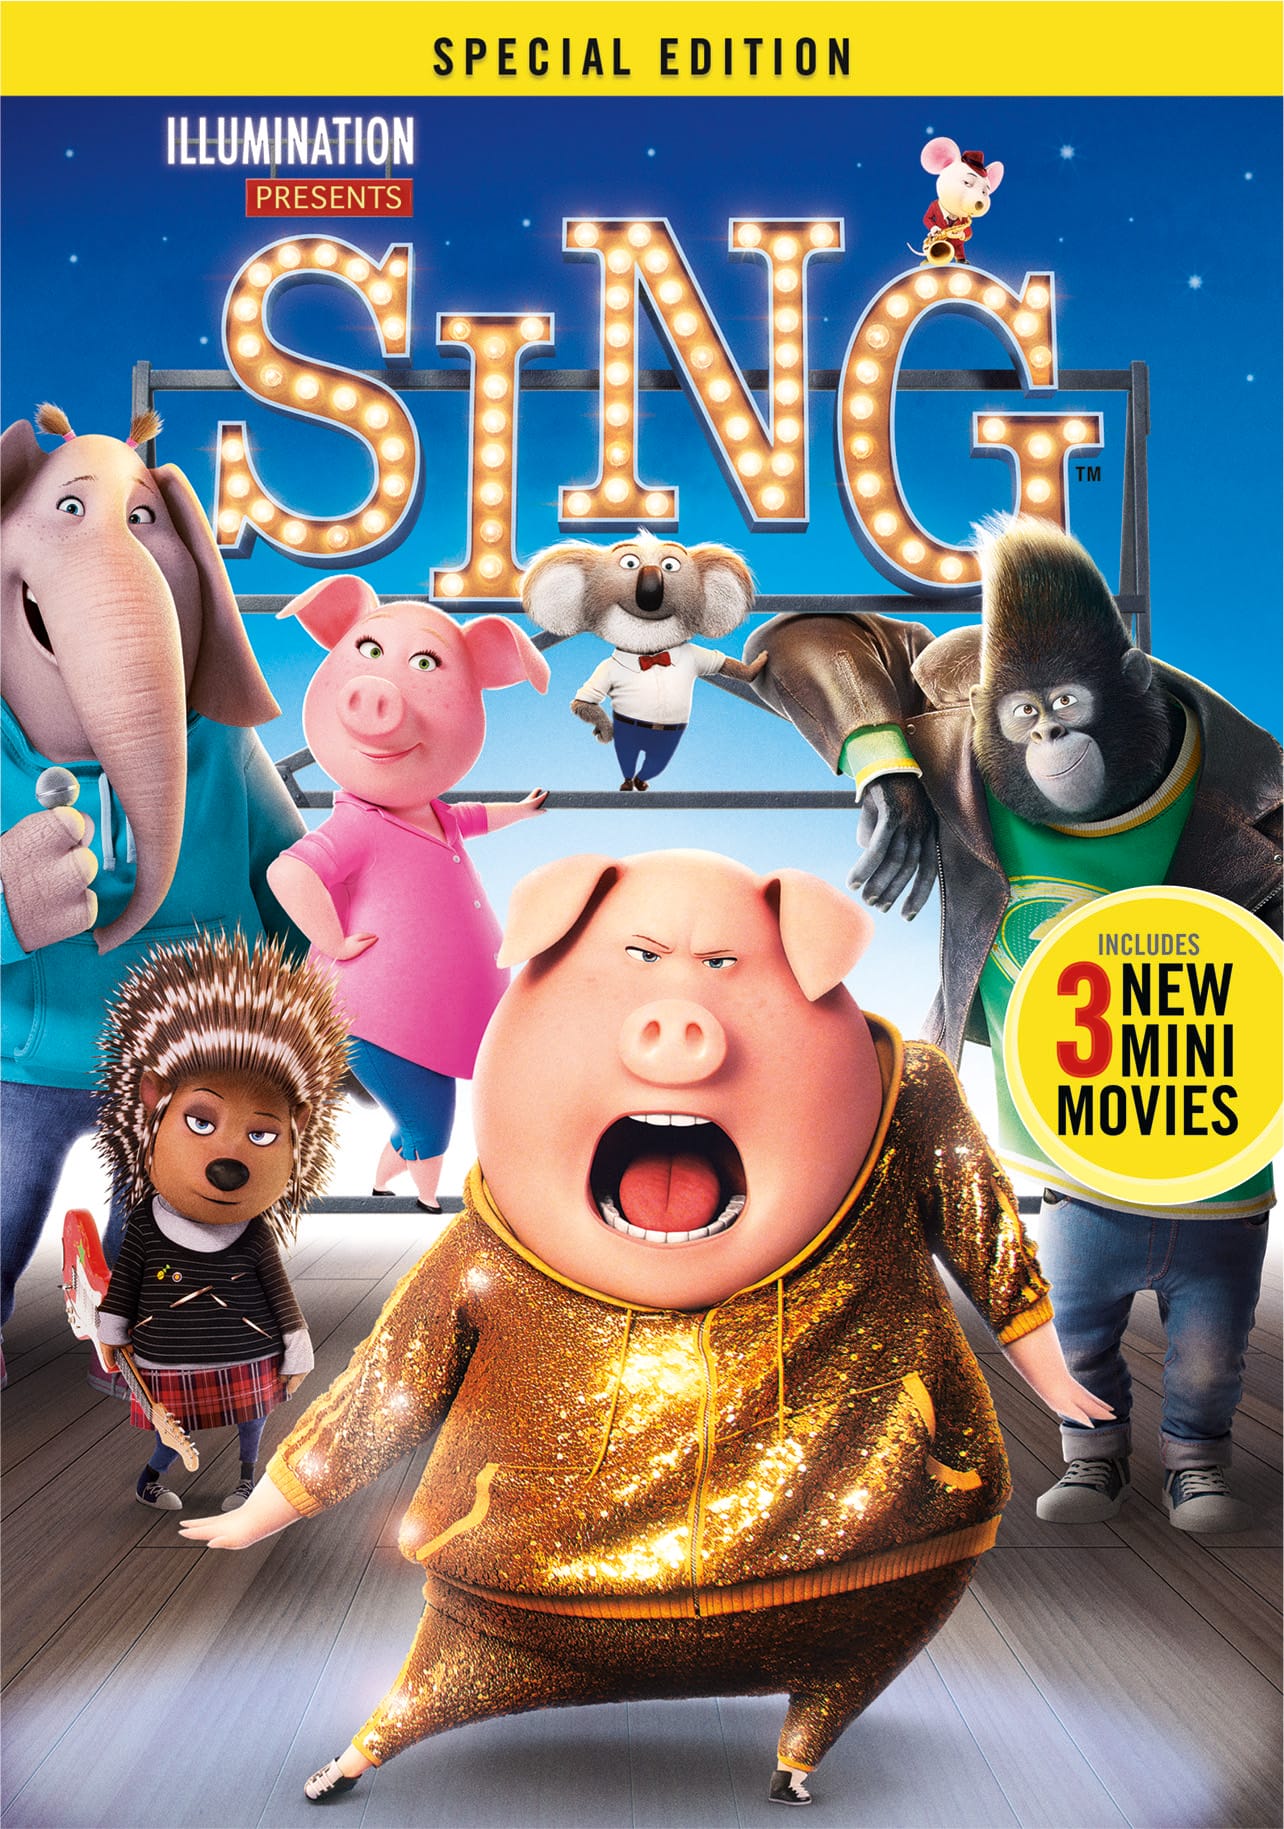 SING is a wonderful, funny, heartwarming film with great music and a fantastic cast. Grab your copy of SING Special Edition when it comes available on Digital HD March 3rd and Blu-ray and DVD on March 21st!